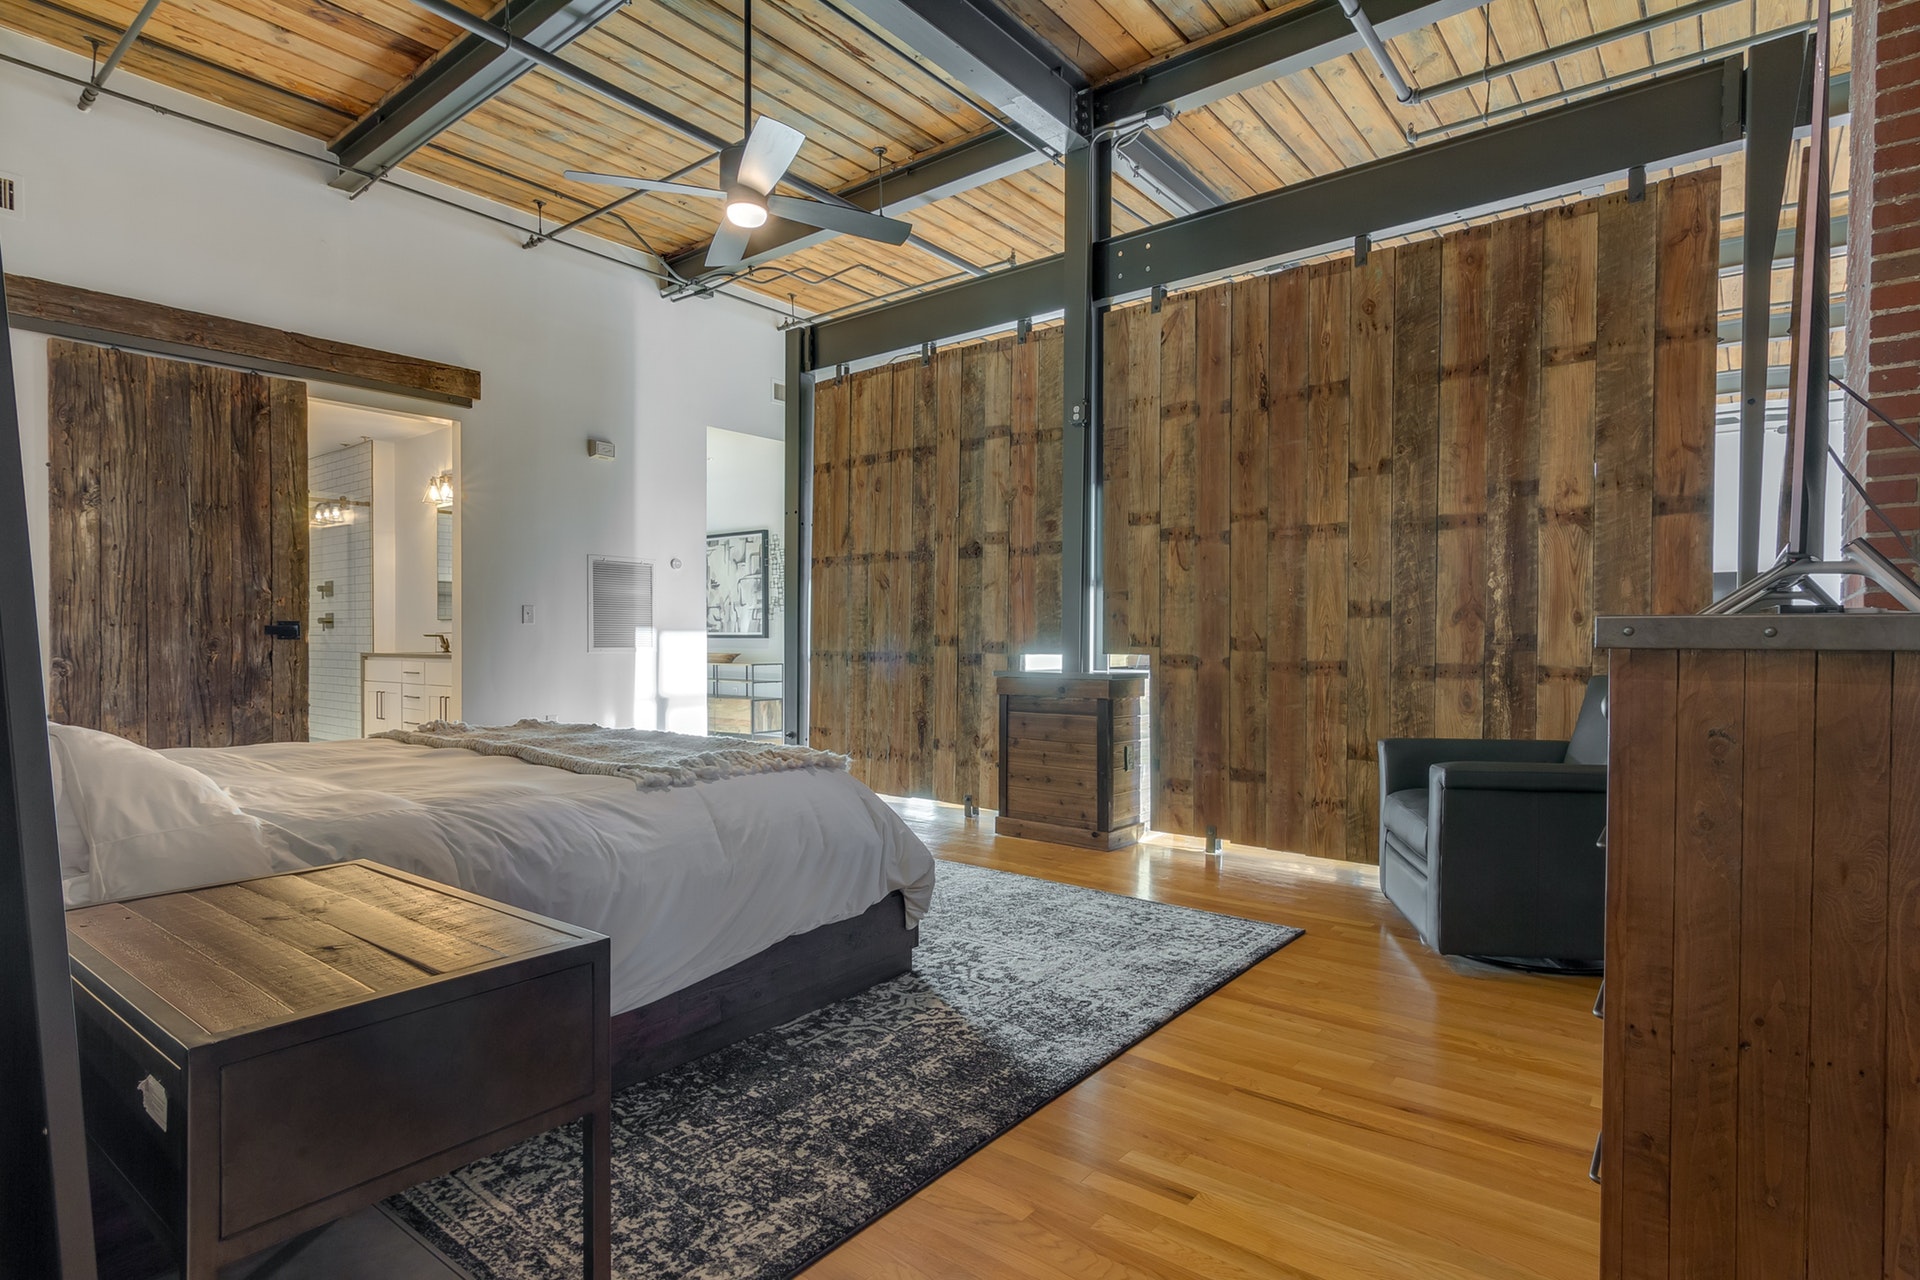 Bedroom with brick wall and white wall light wood floor wood ceiling large ceiling fan exposed pipes sliding barn door to bathroom